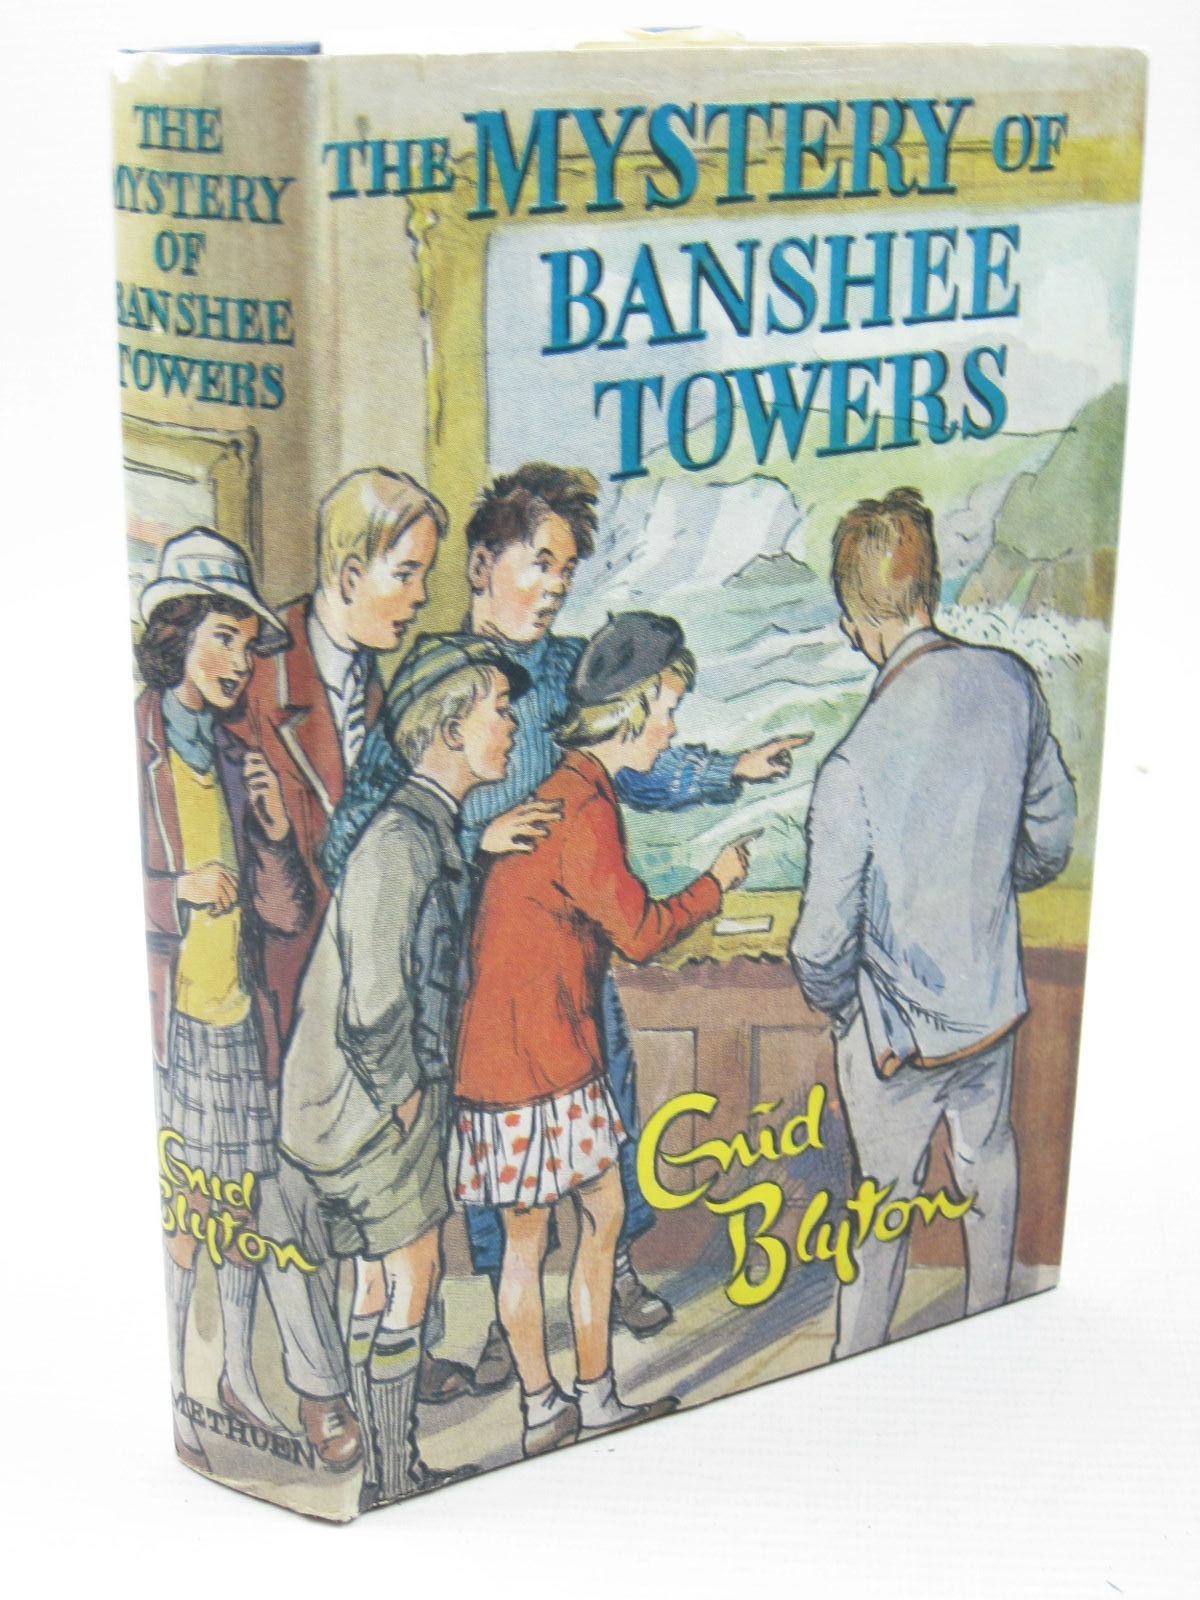 Cover of THE MYSTERY OF BANSHEE TOWERS by Enid Blyton